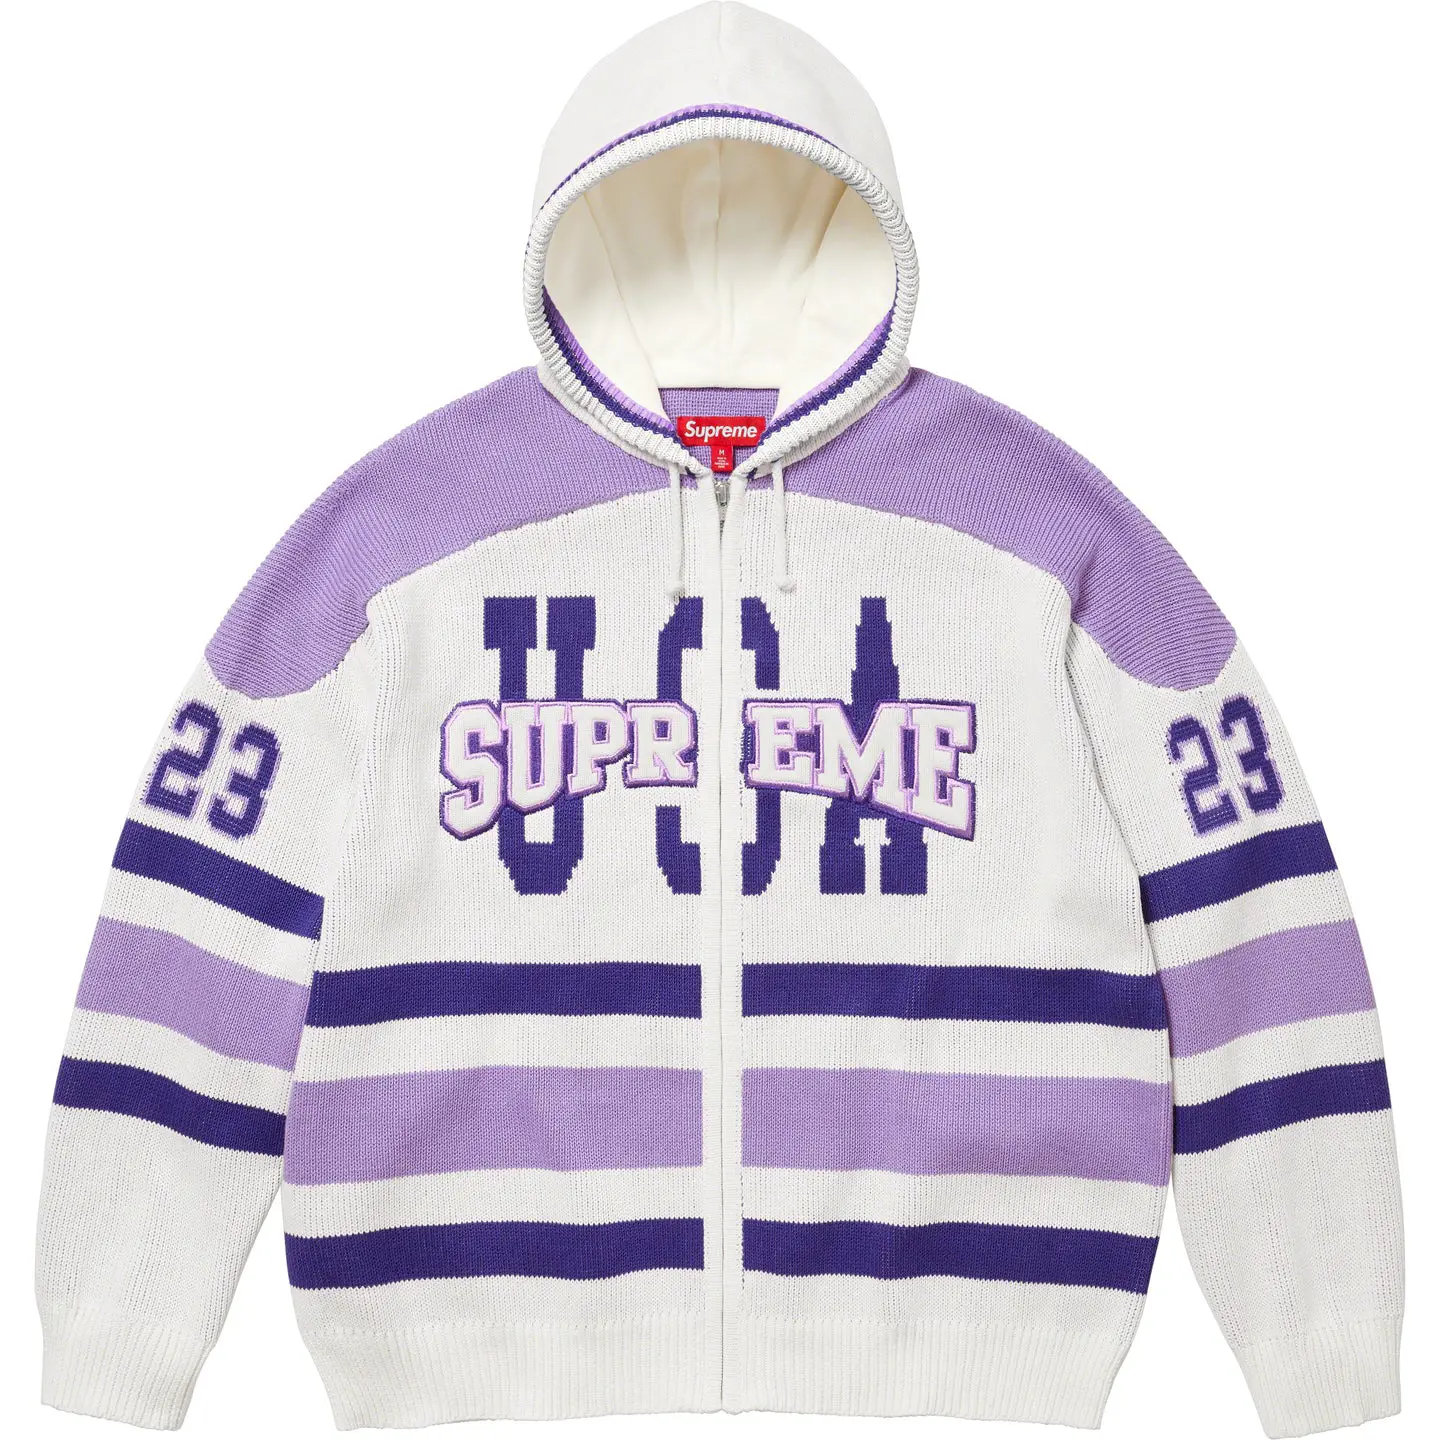 Supreme USA Zip Up Hooded Sweater